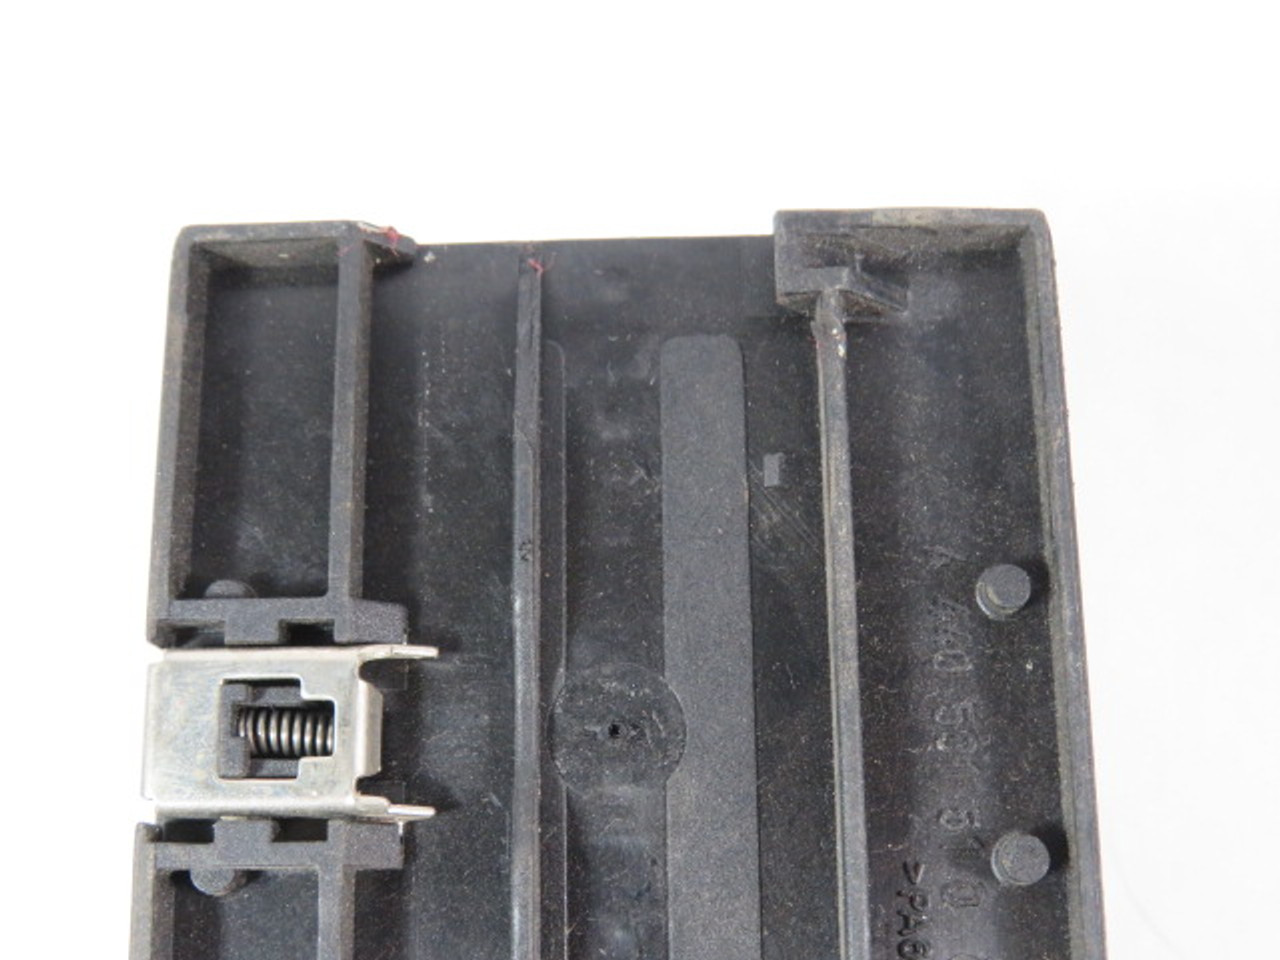 Entrelec ESTOP-6A Current Monitoring Relay SLIGHT DAMAGE TO BOTTOM USED